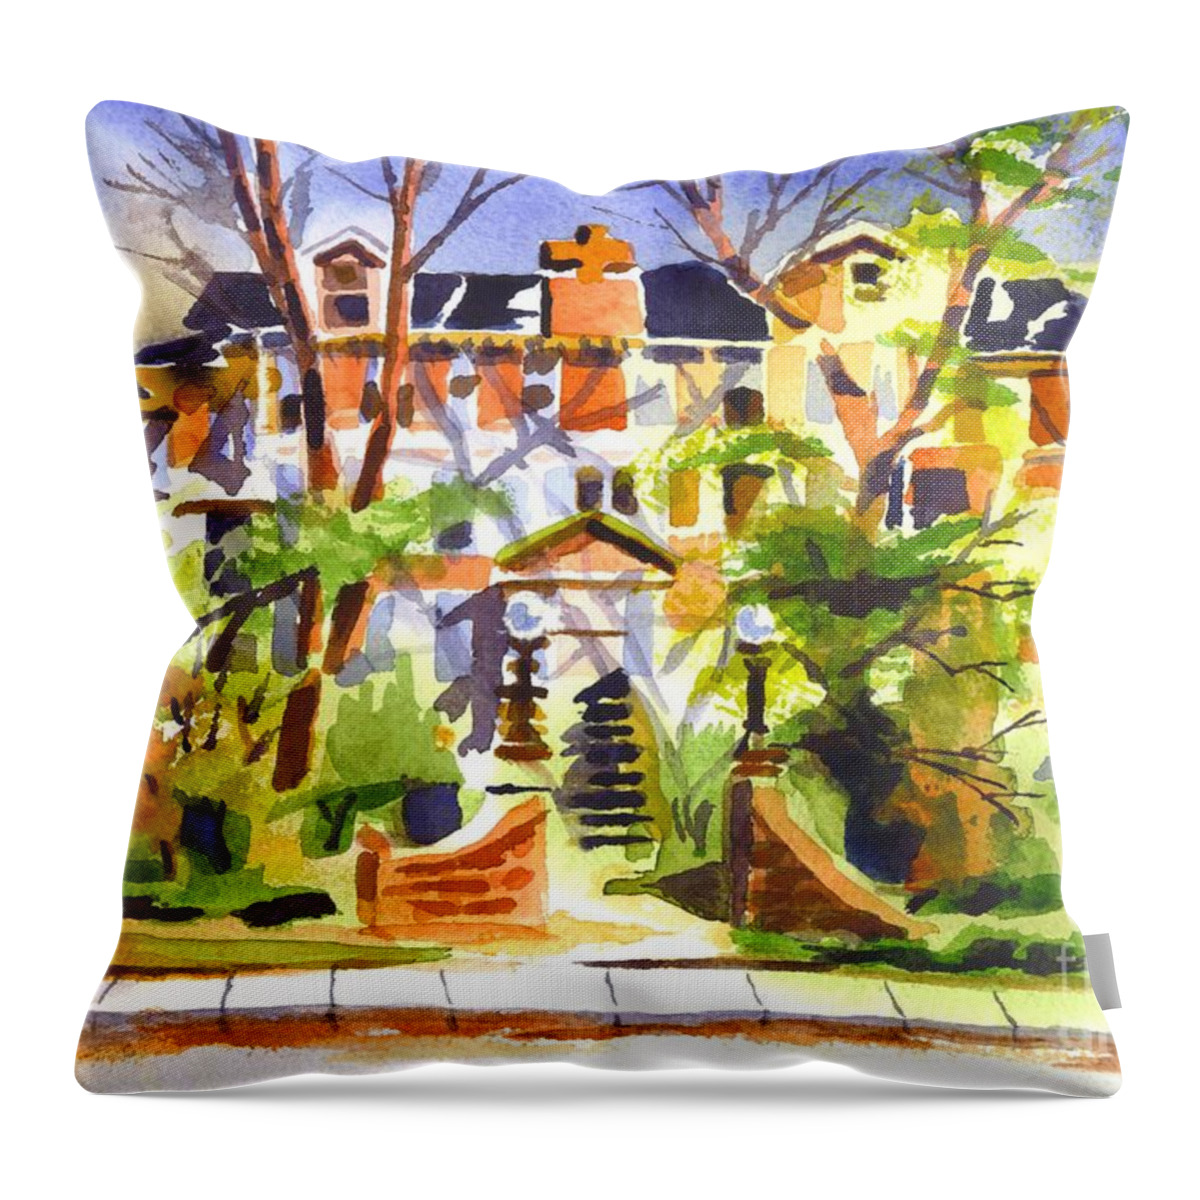 Ste Marys Of The Ozarks Hospital. Remains Of The Day Throw Pillow featuring the painting Ste Marys of the Ozarks Hospital by Kip DeVore